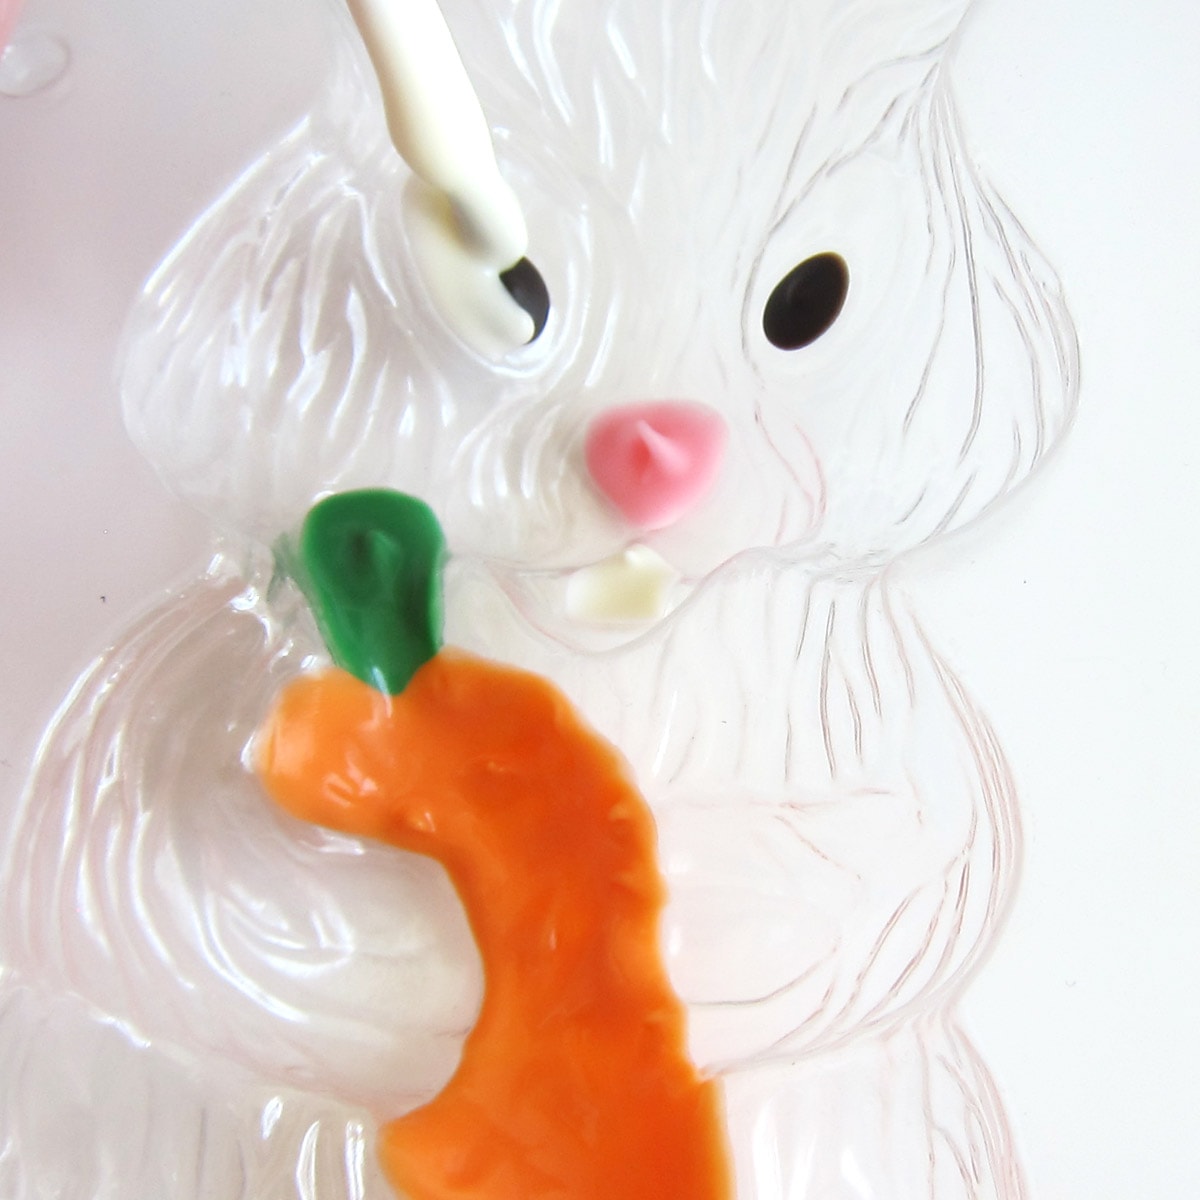 Painting the whites of the bunny's eye in the bunny candy mold.